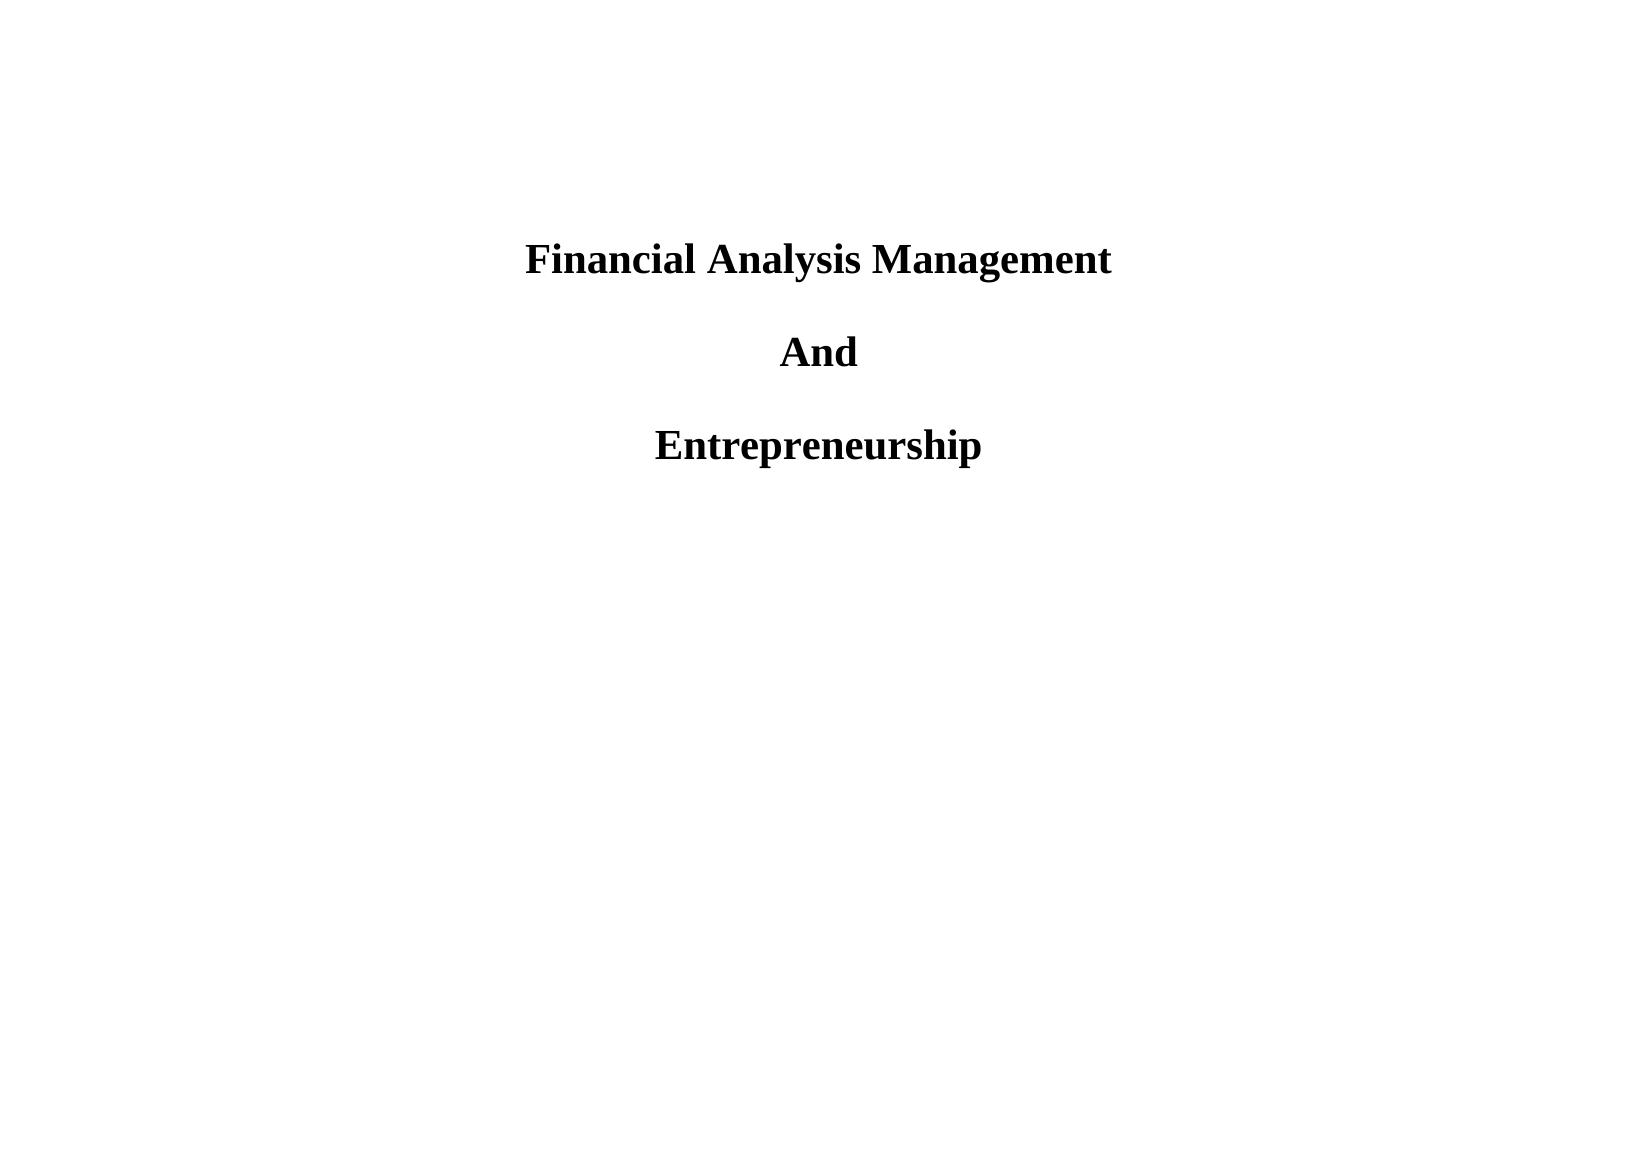 Financial Analysis Management - Apple and Samsung_1